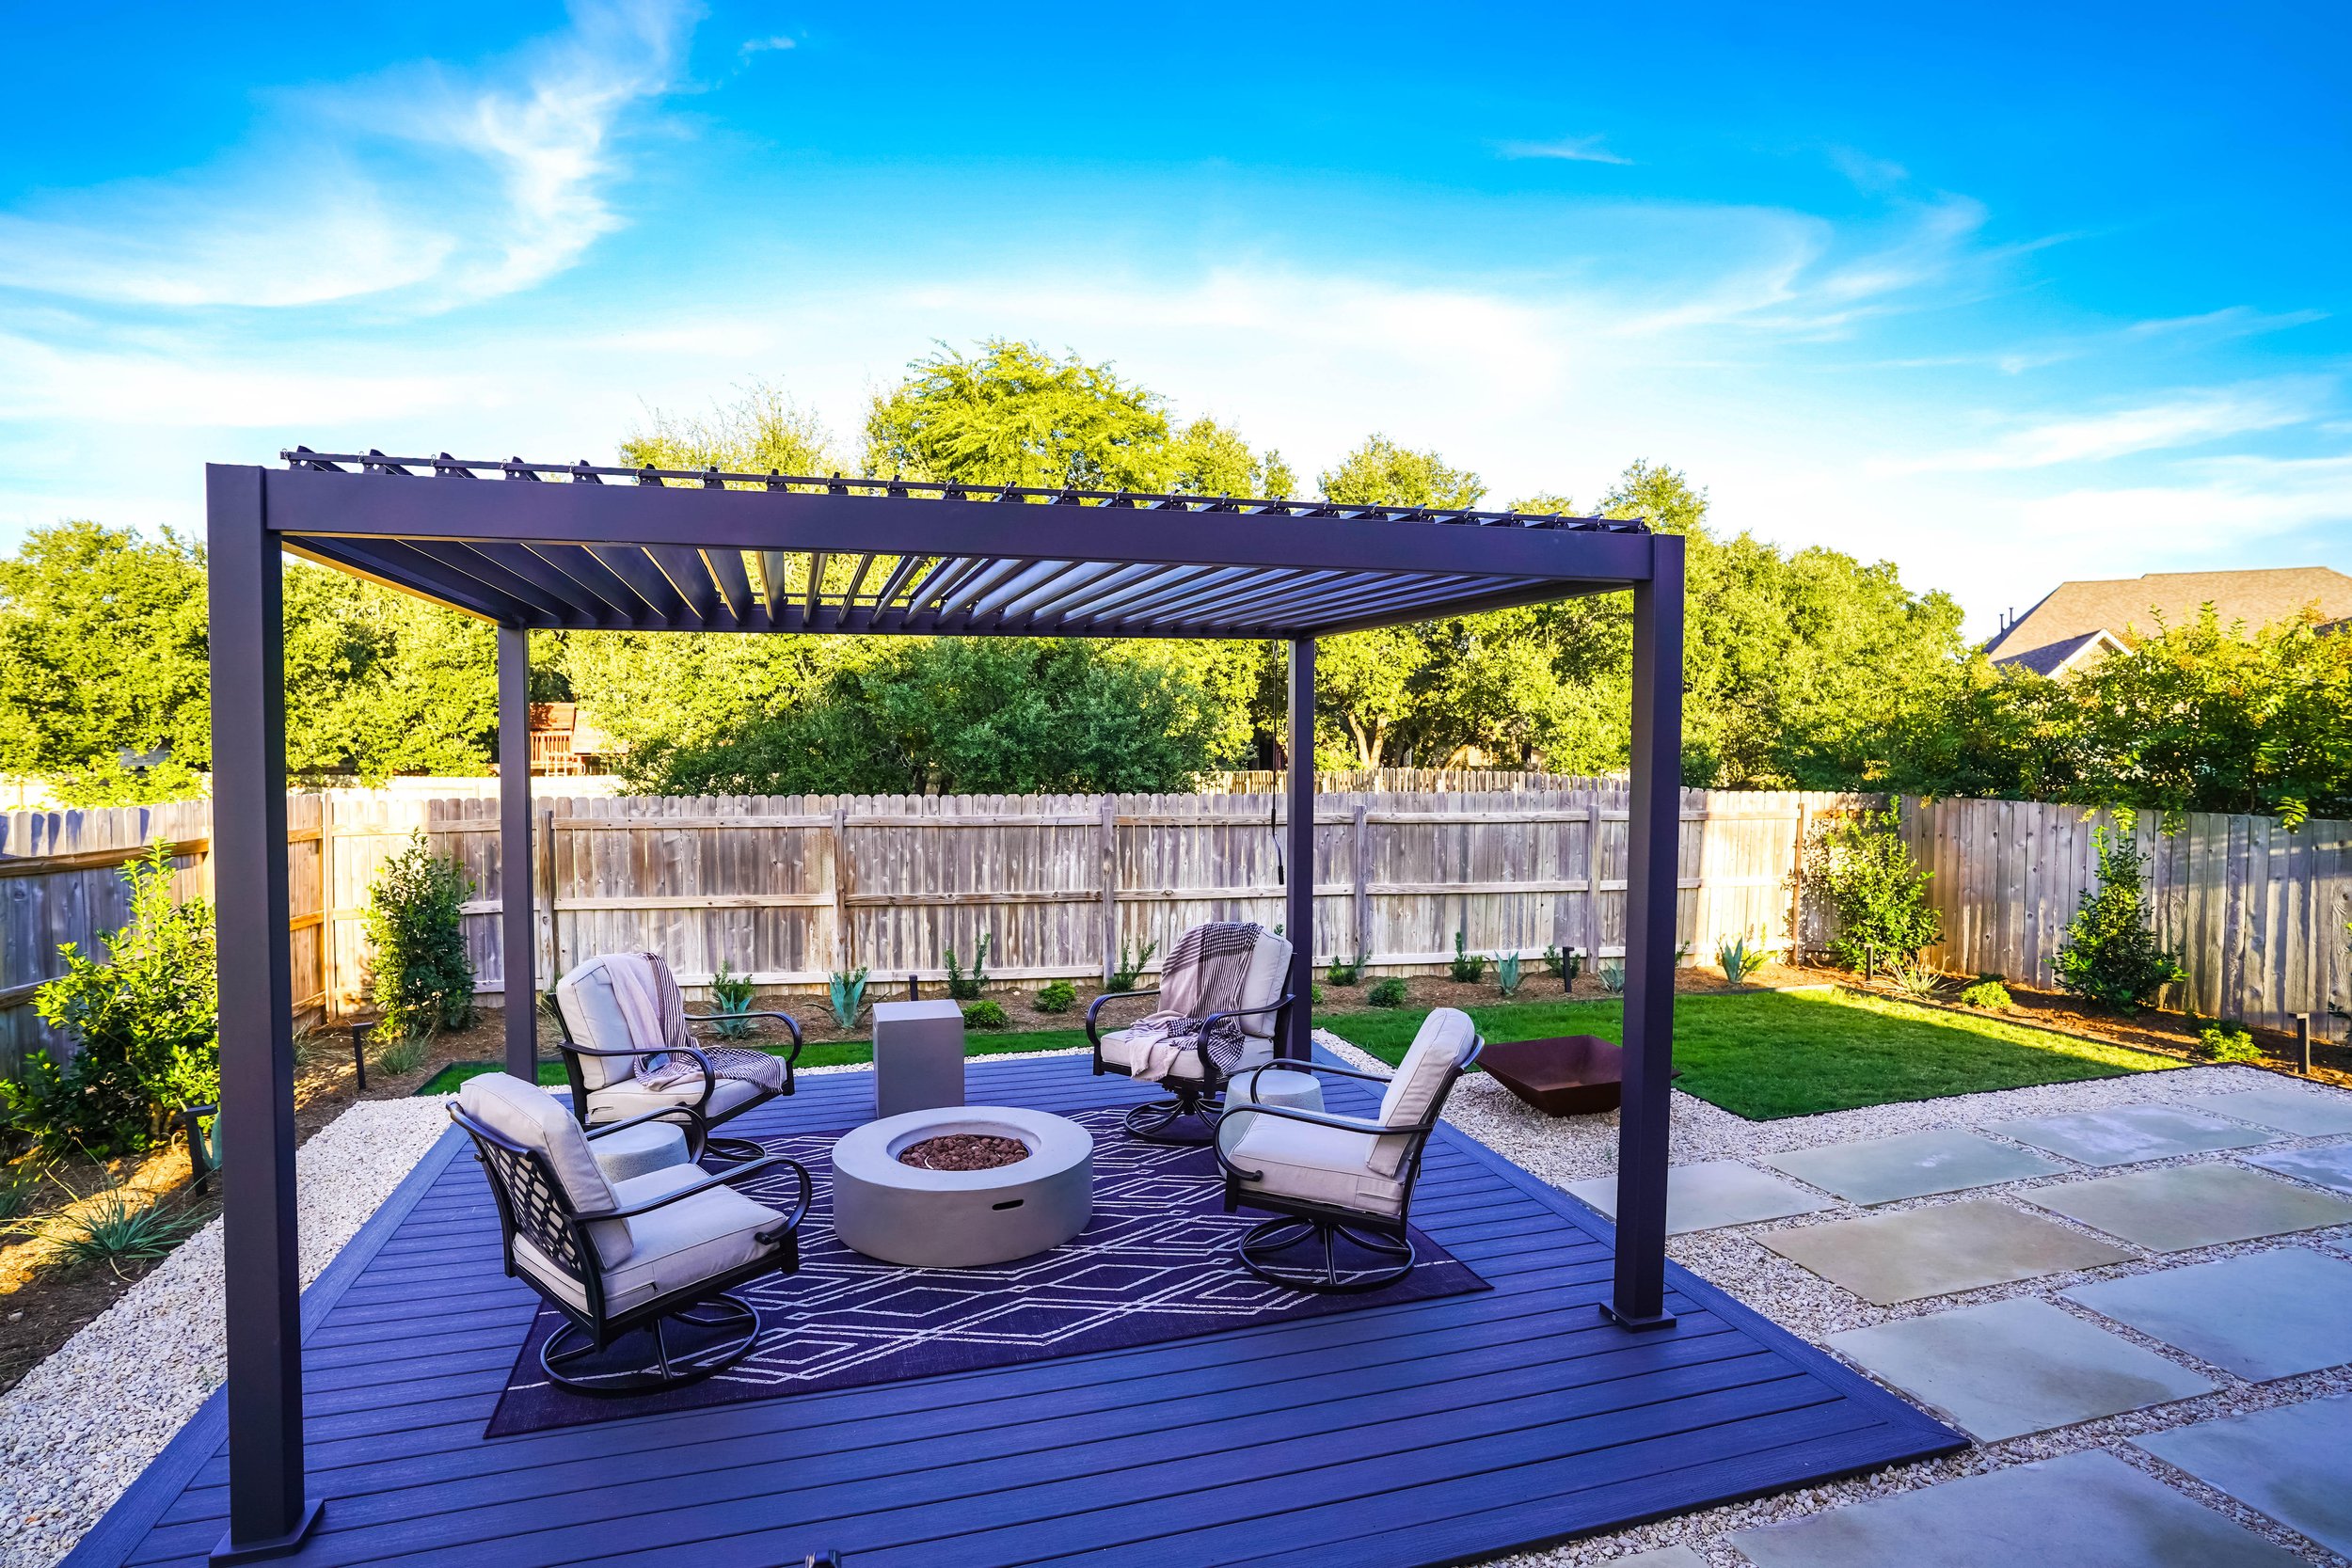 louvered metal pergola over fire pit seating area in fenced backyard